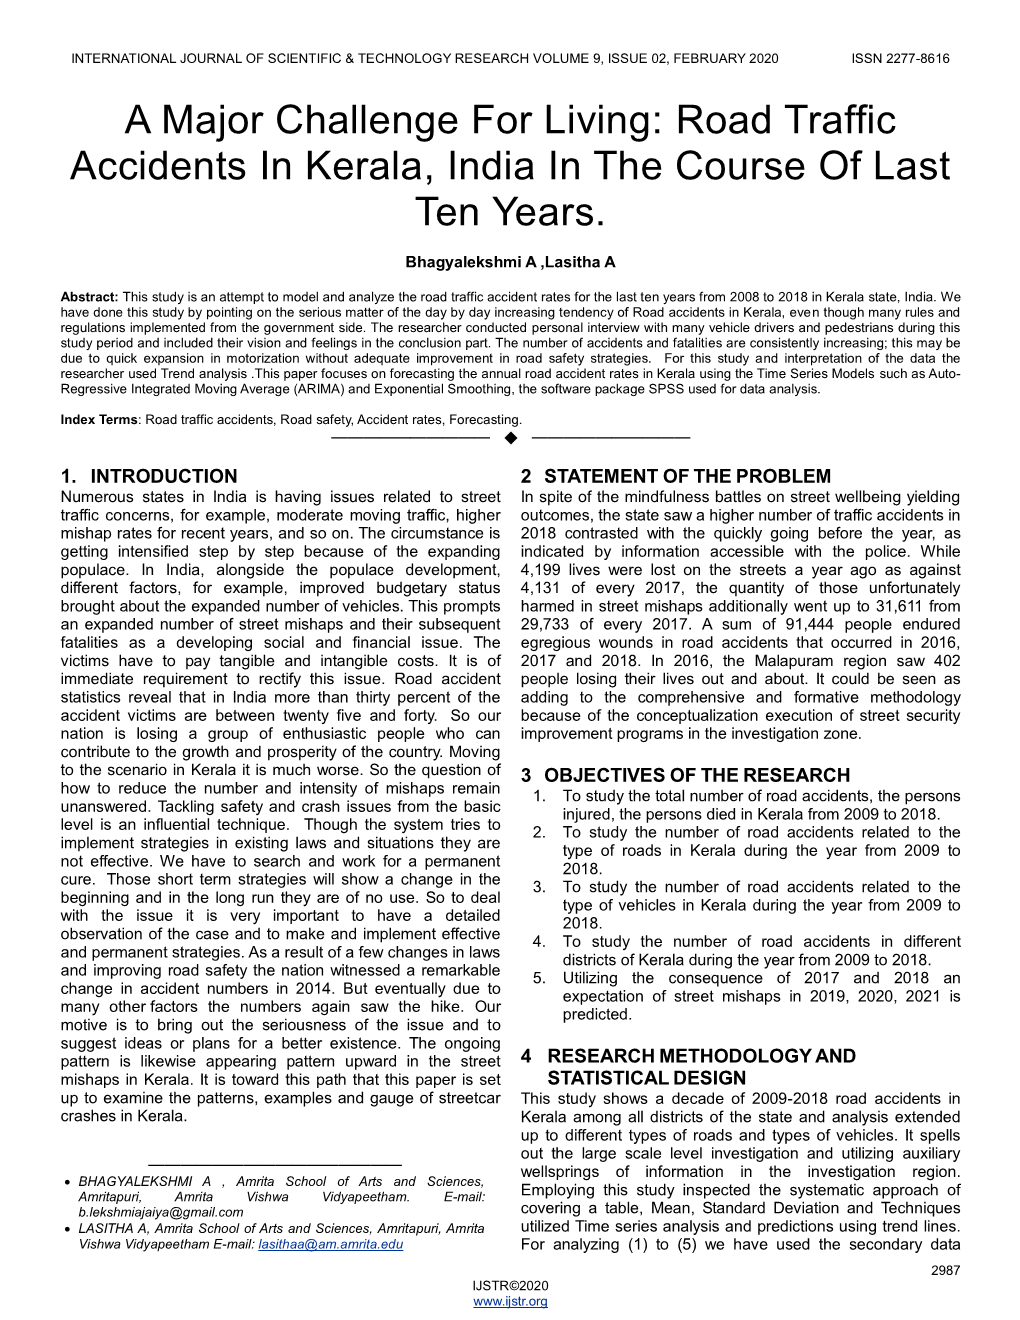 A Major Challenge for Living: Road Traffic Accidents in Kerala, India in the Course of Last Ten Years